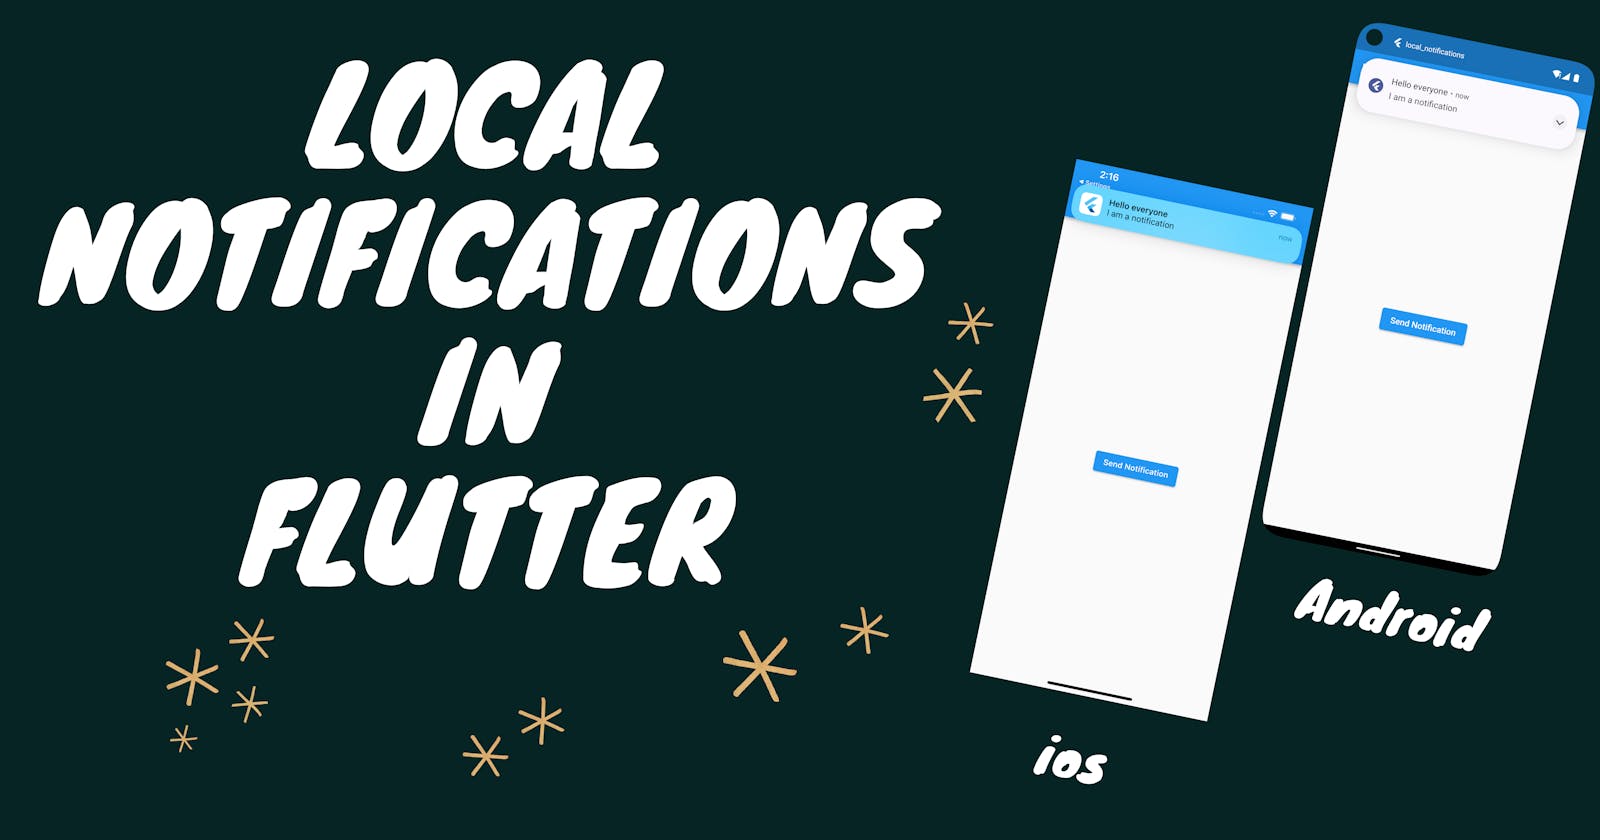 Local Notifications in Flutter